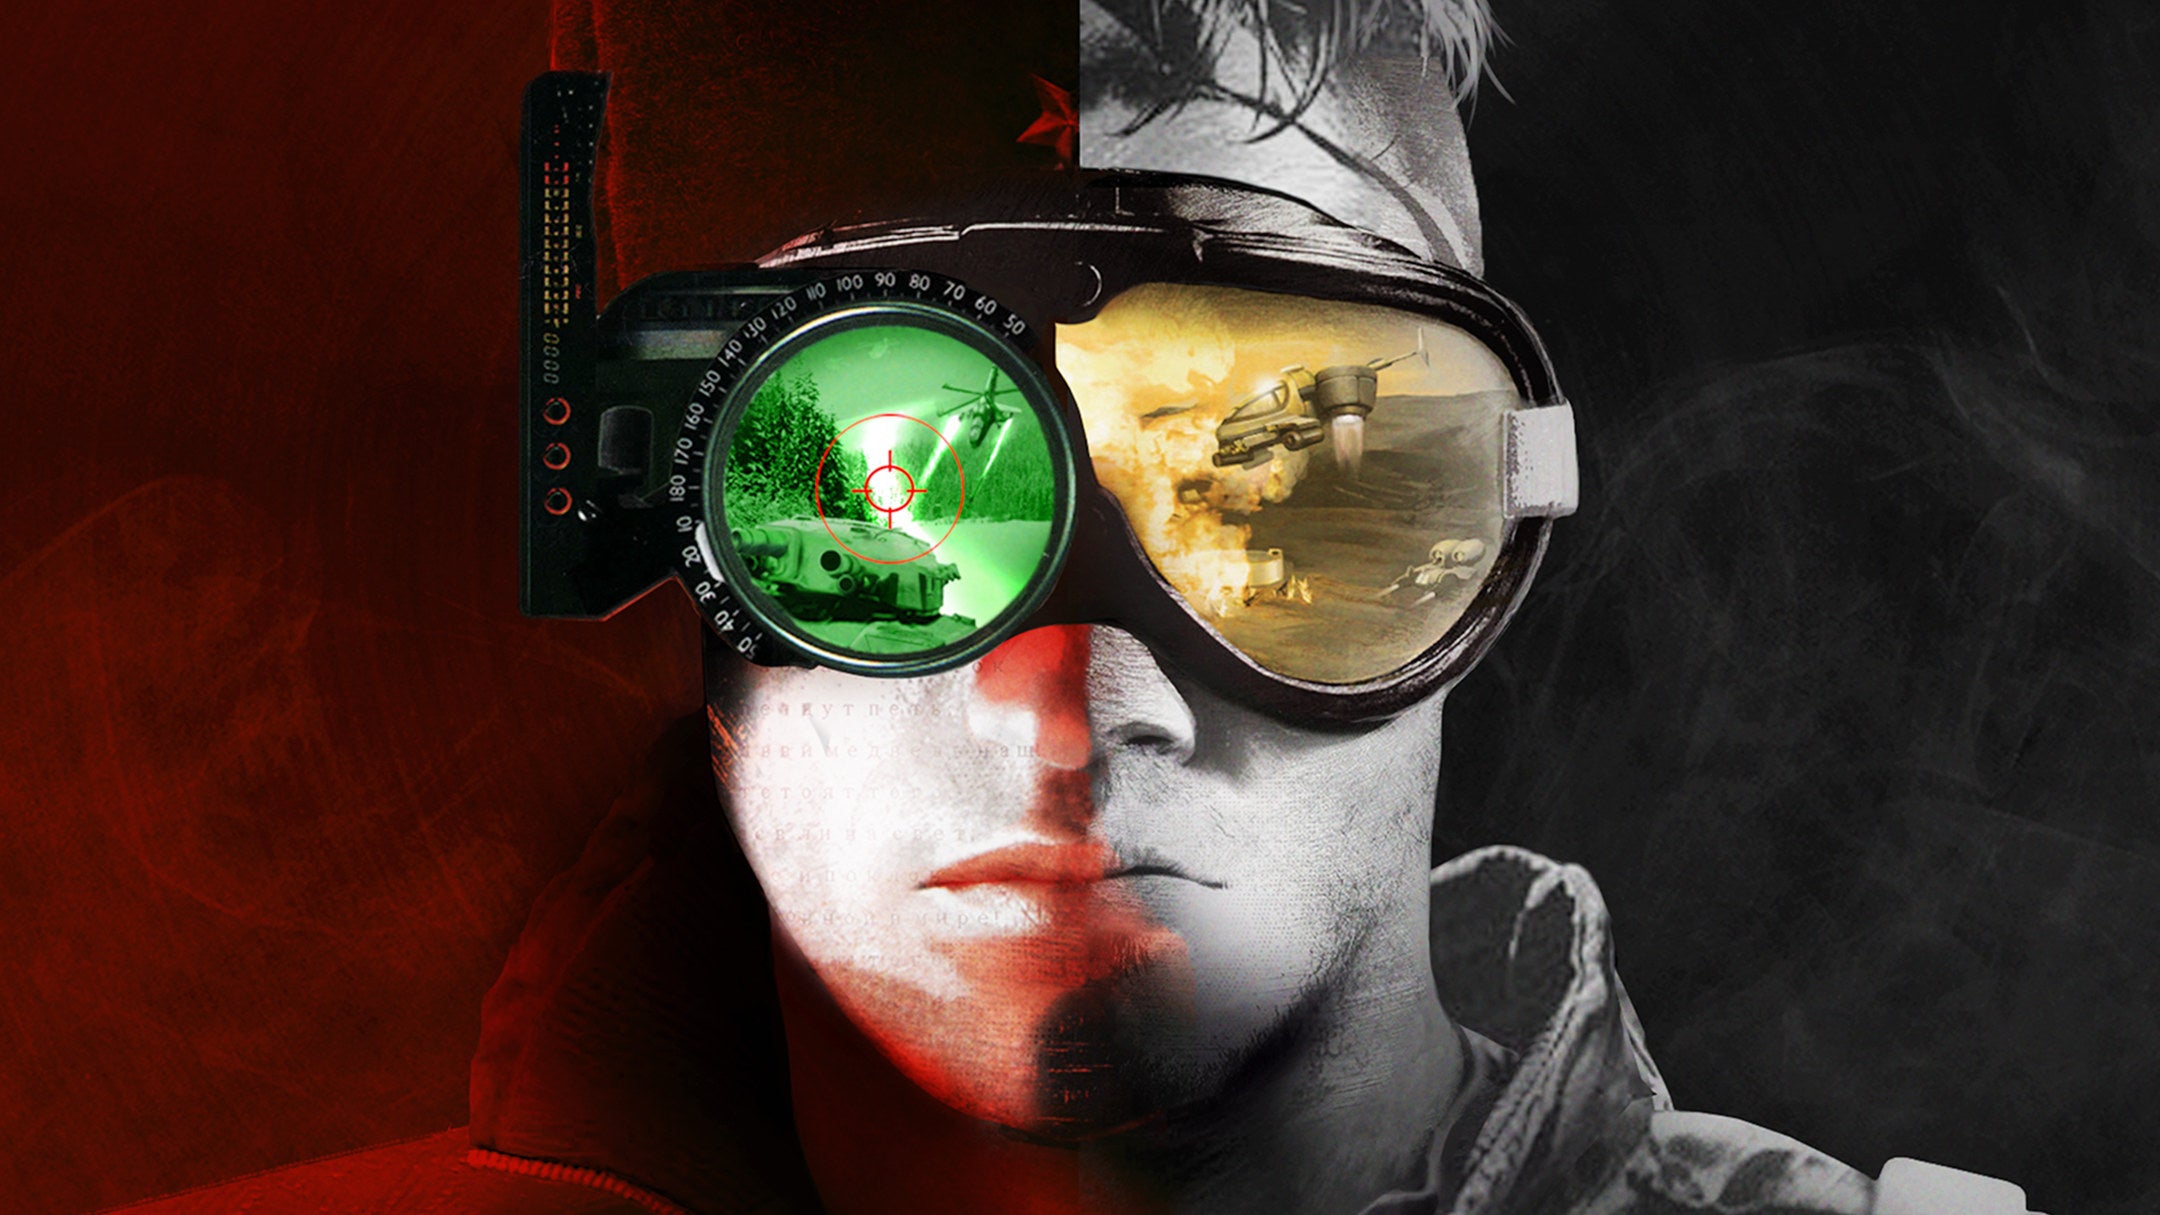 Image for Command & Conquer Remastered soundtracks now on Spotify and other streaming services